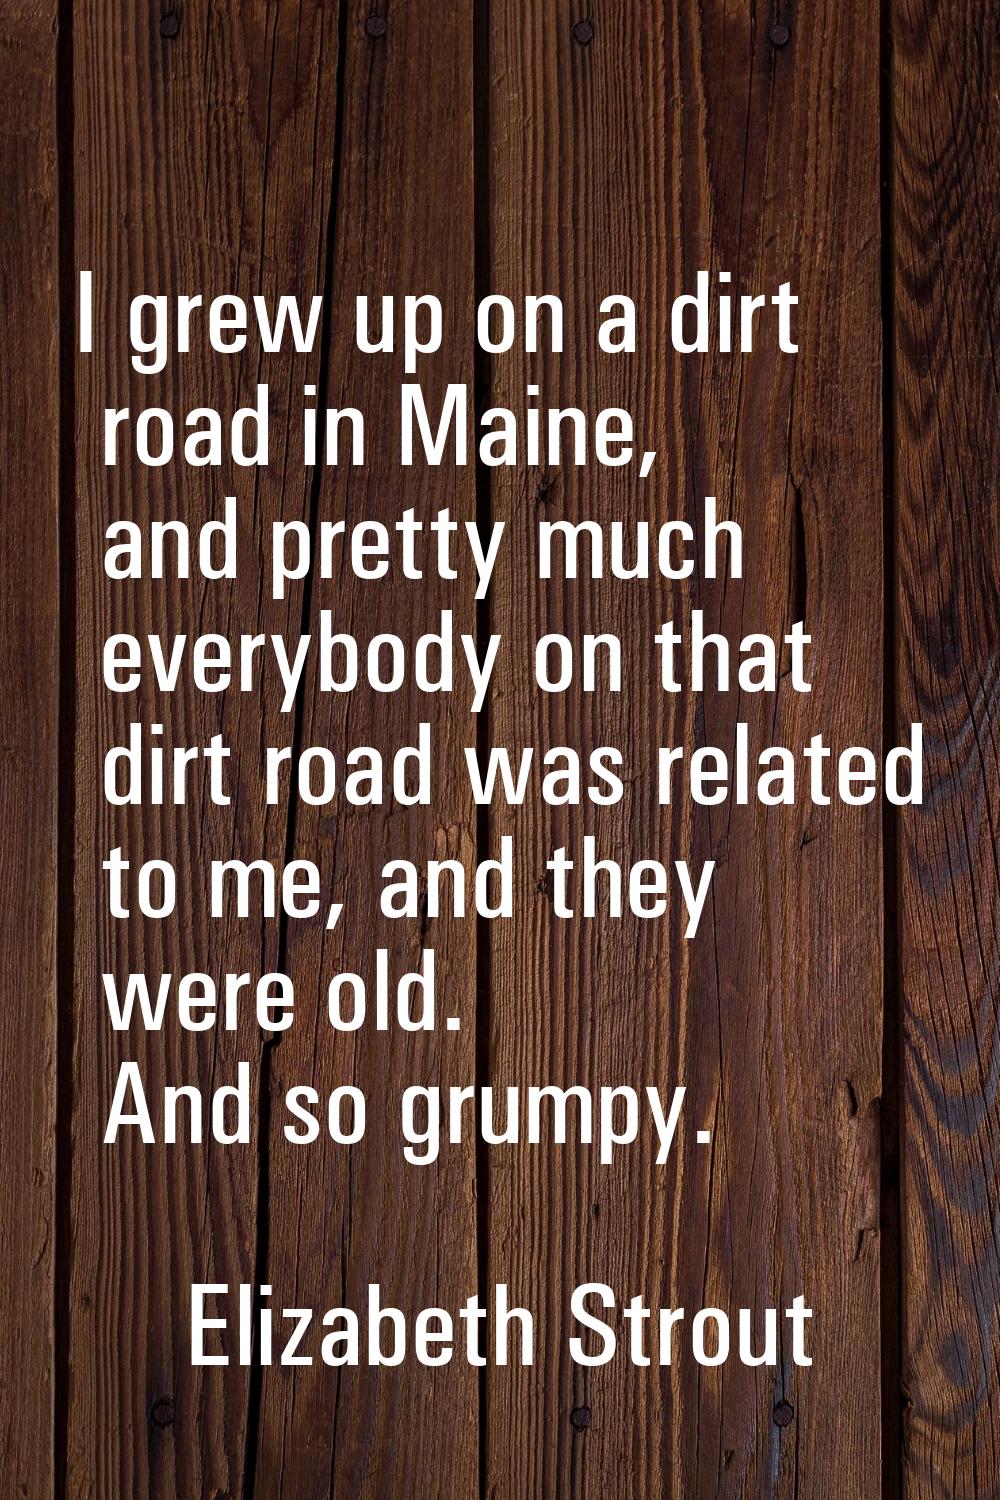 I grew up on a dirt road in Maine, and pretty much everybody on that dirt road was related to me, a